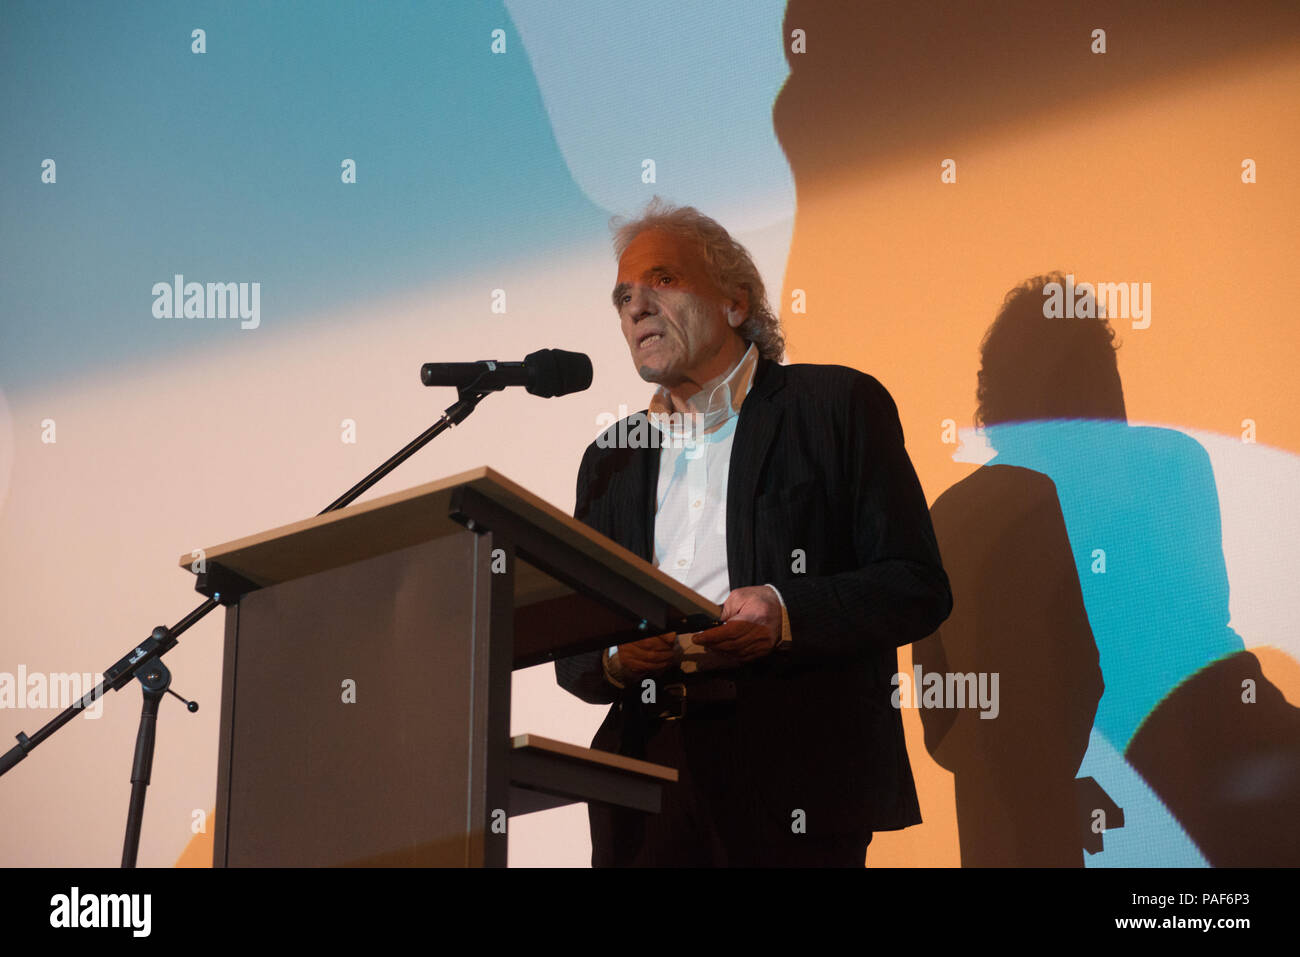 Director Abel Ferrara and director Philipp Gröning at a photocall at Filmfest München 2018 Stock Photo